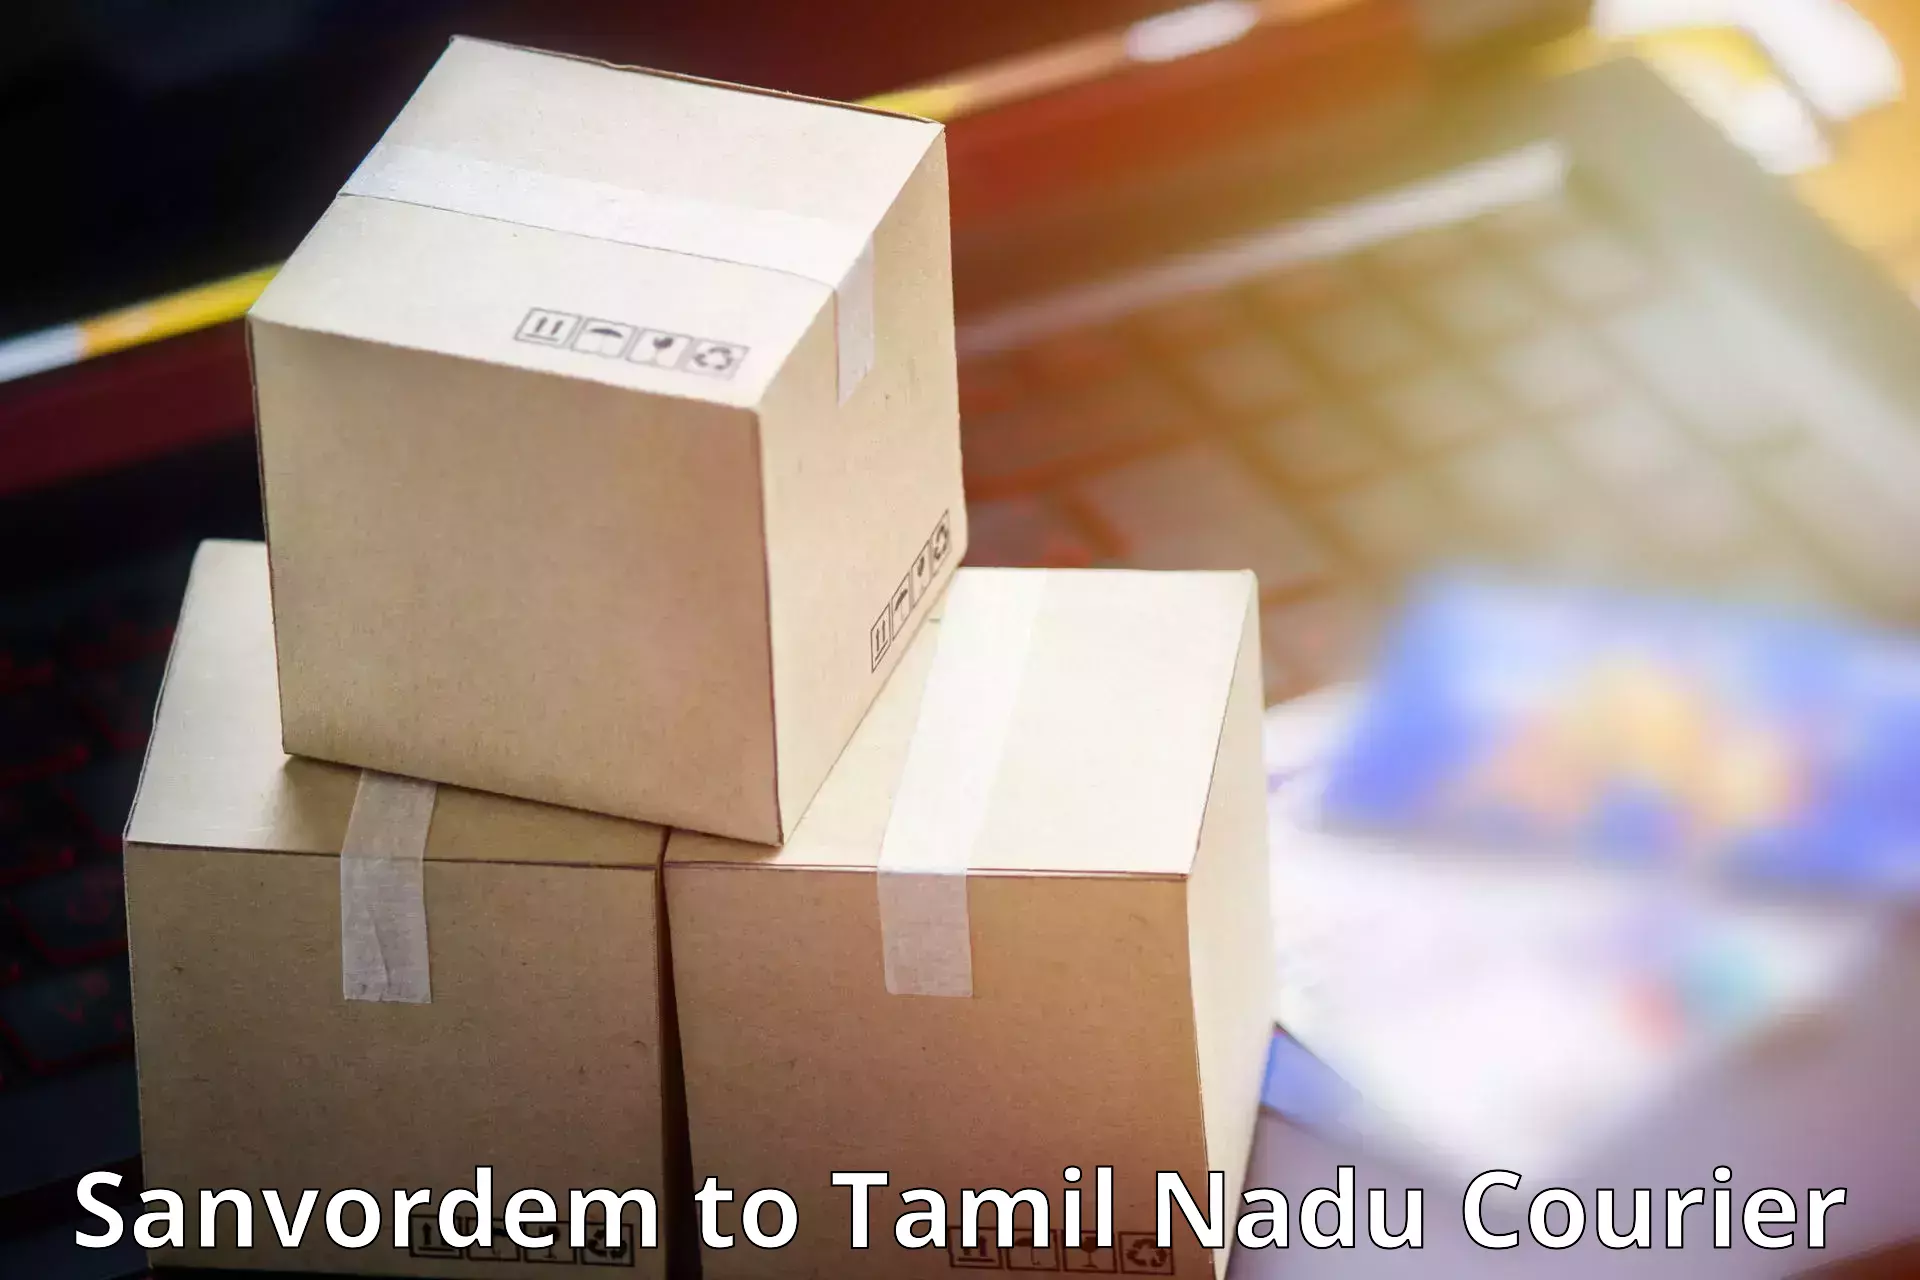 Reliable delivery network Sanvordem to Tuticorin Port